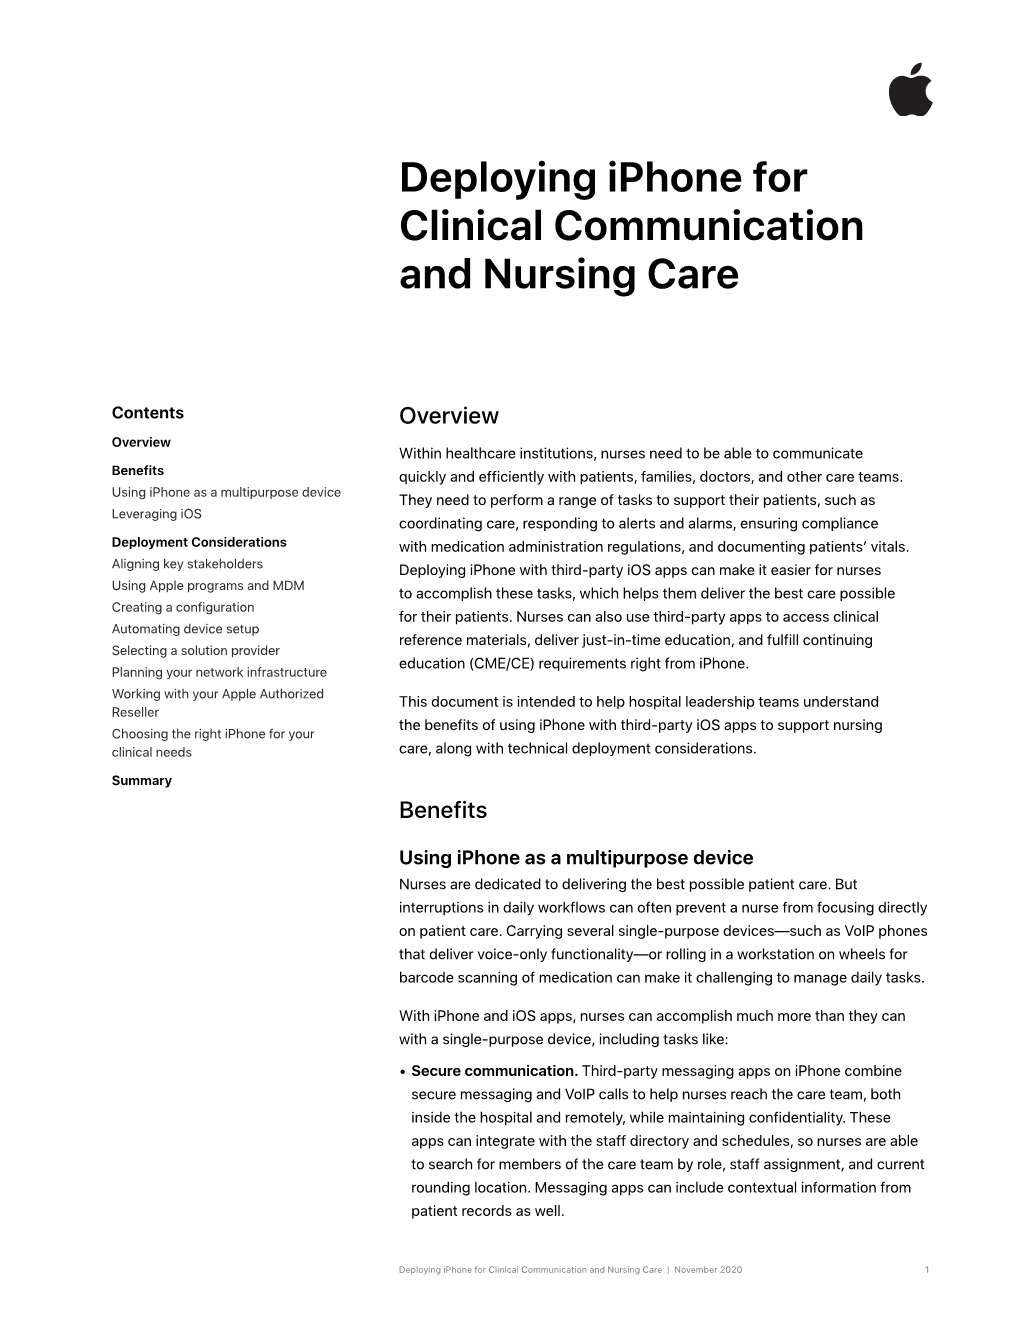 Deploying Iphone for Nursing Care